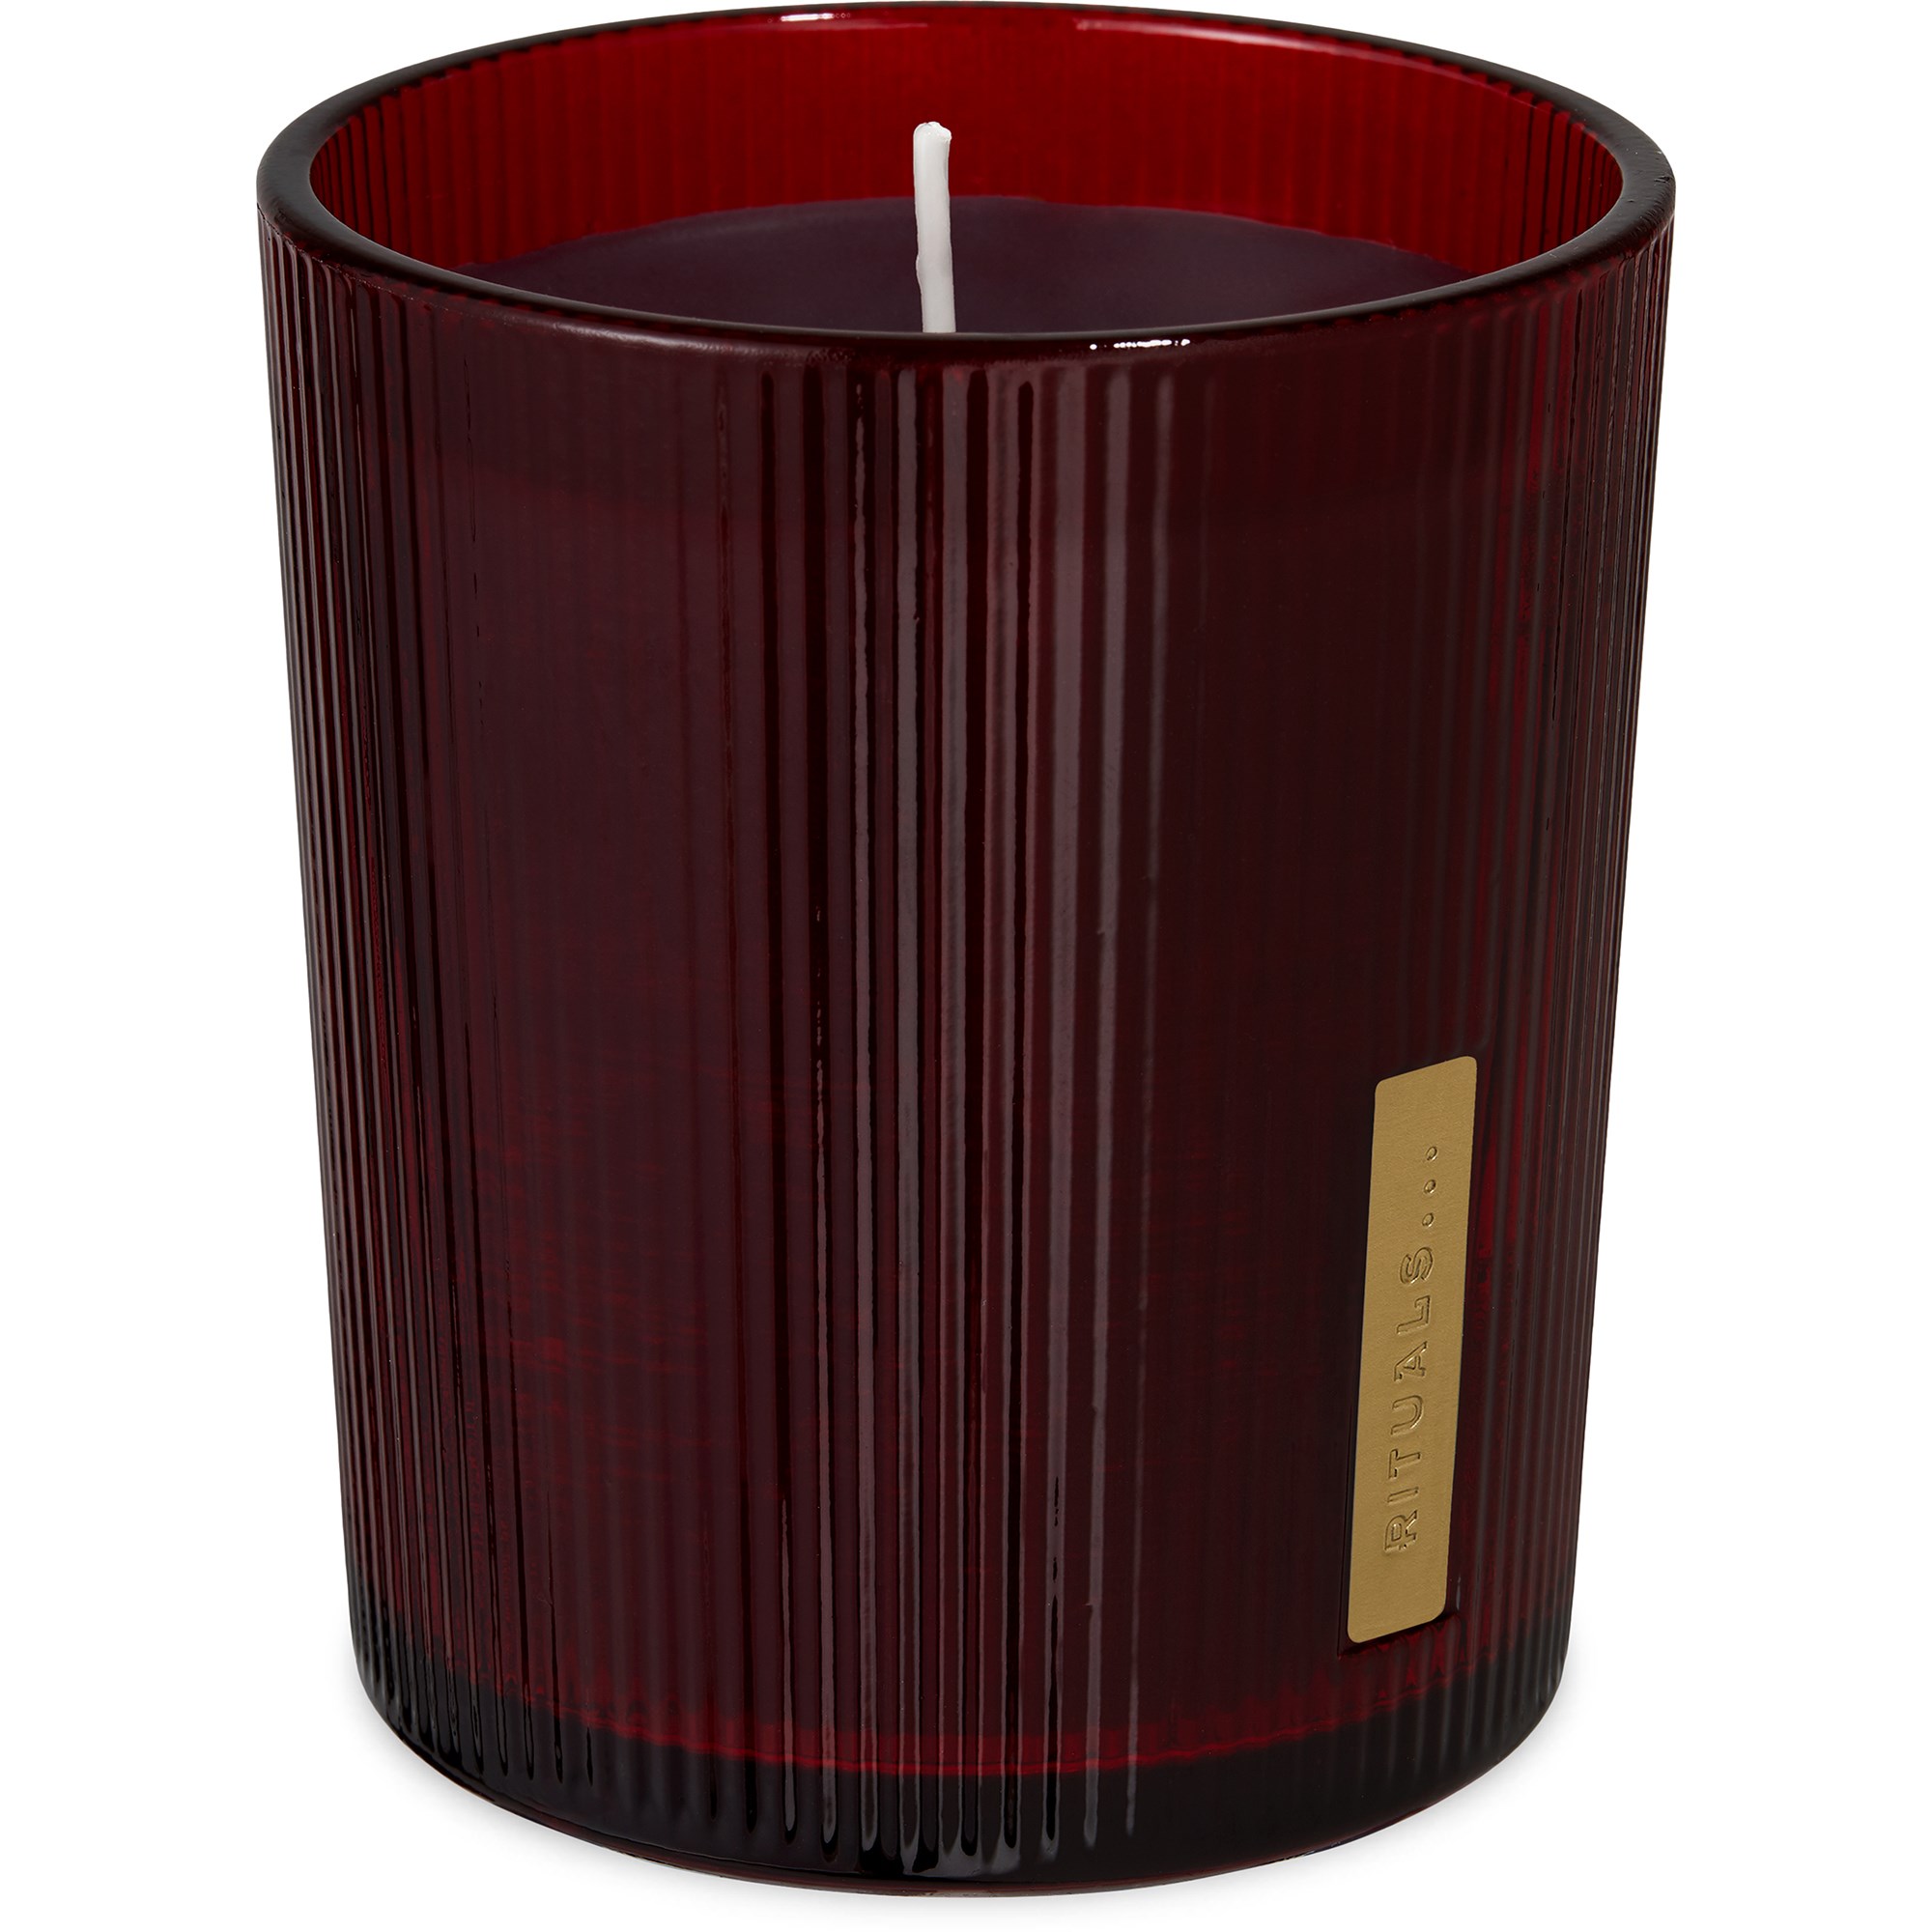 Rituals The Ritual of Ayurveda Home Fragrance Scented Candle